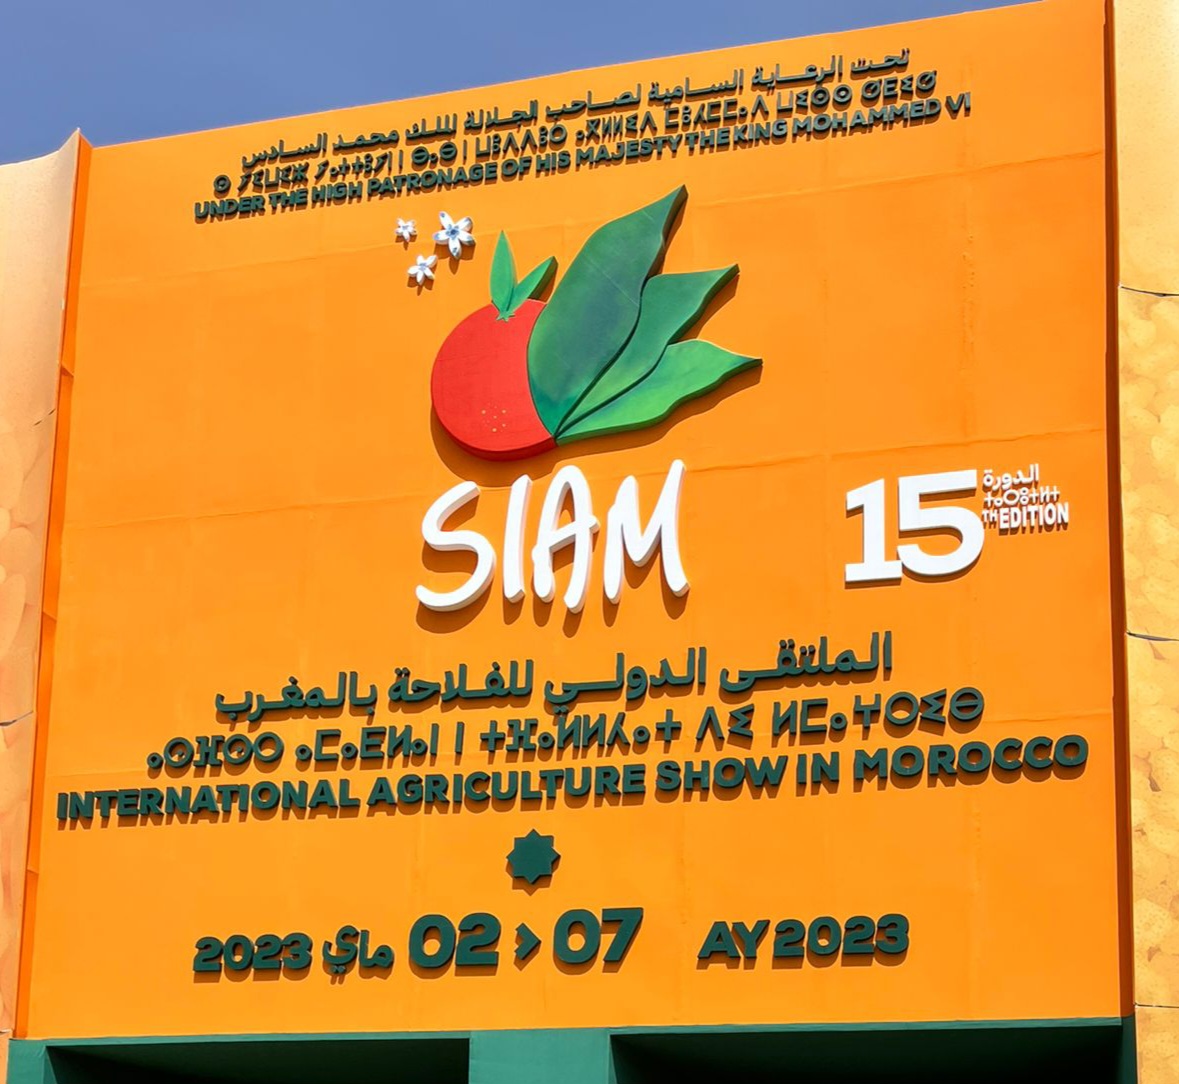 The CIHEAM at the International Agricultural Show in Morocco